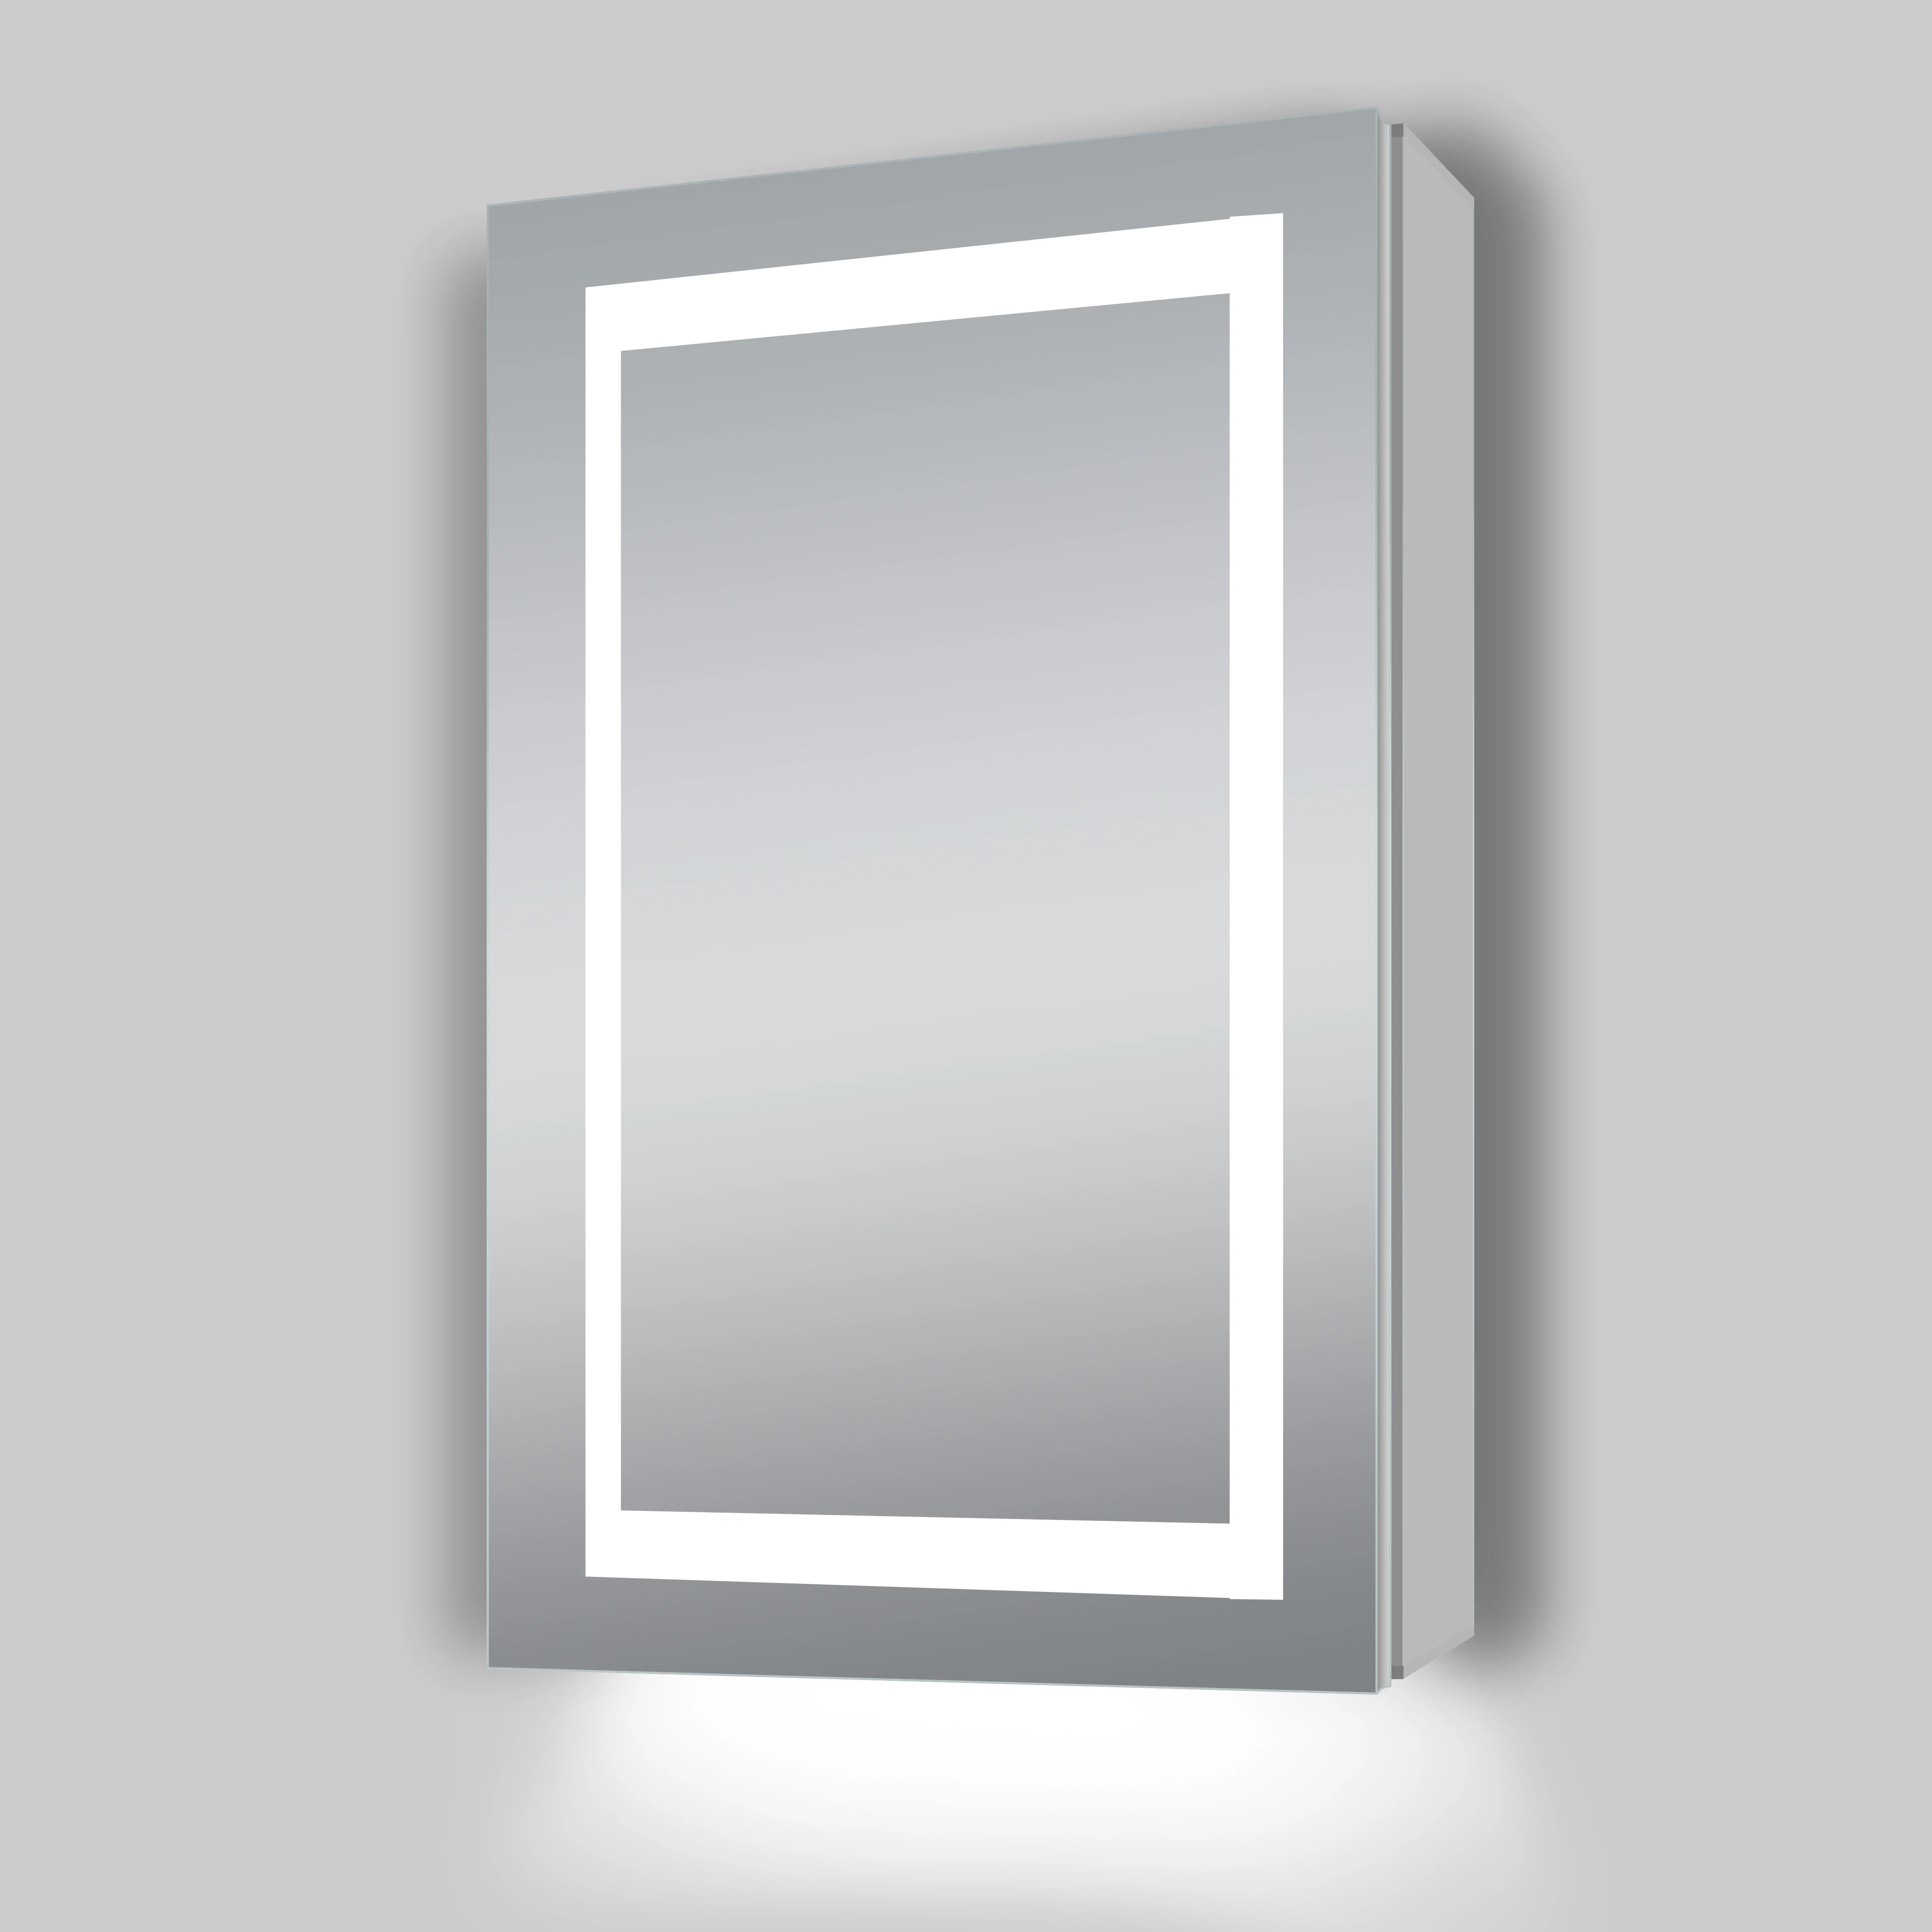 LED Mirror Cabinet with Sensor, Demister and Shaver for modern bathroom mirror cabinet